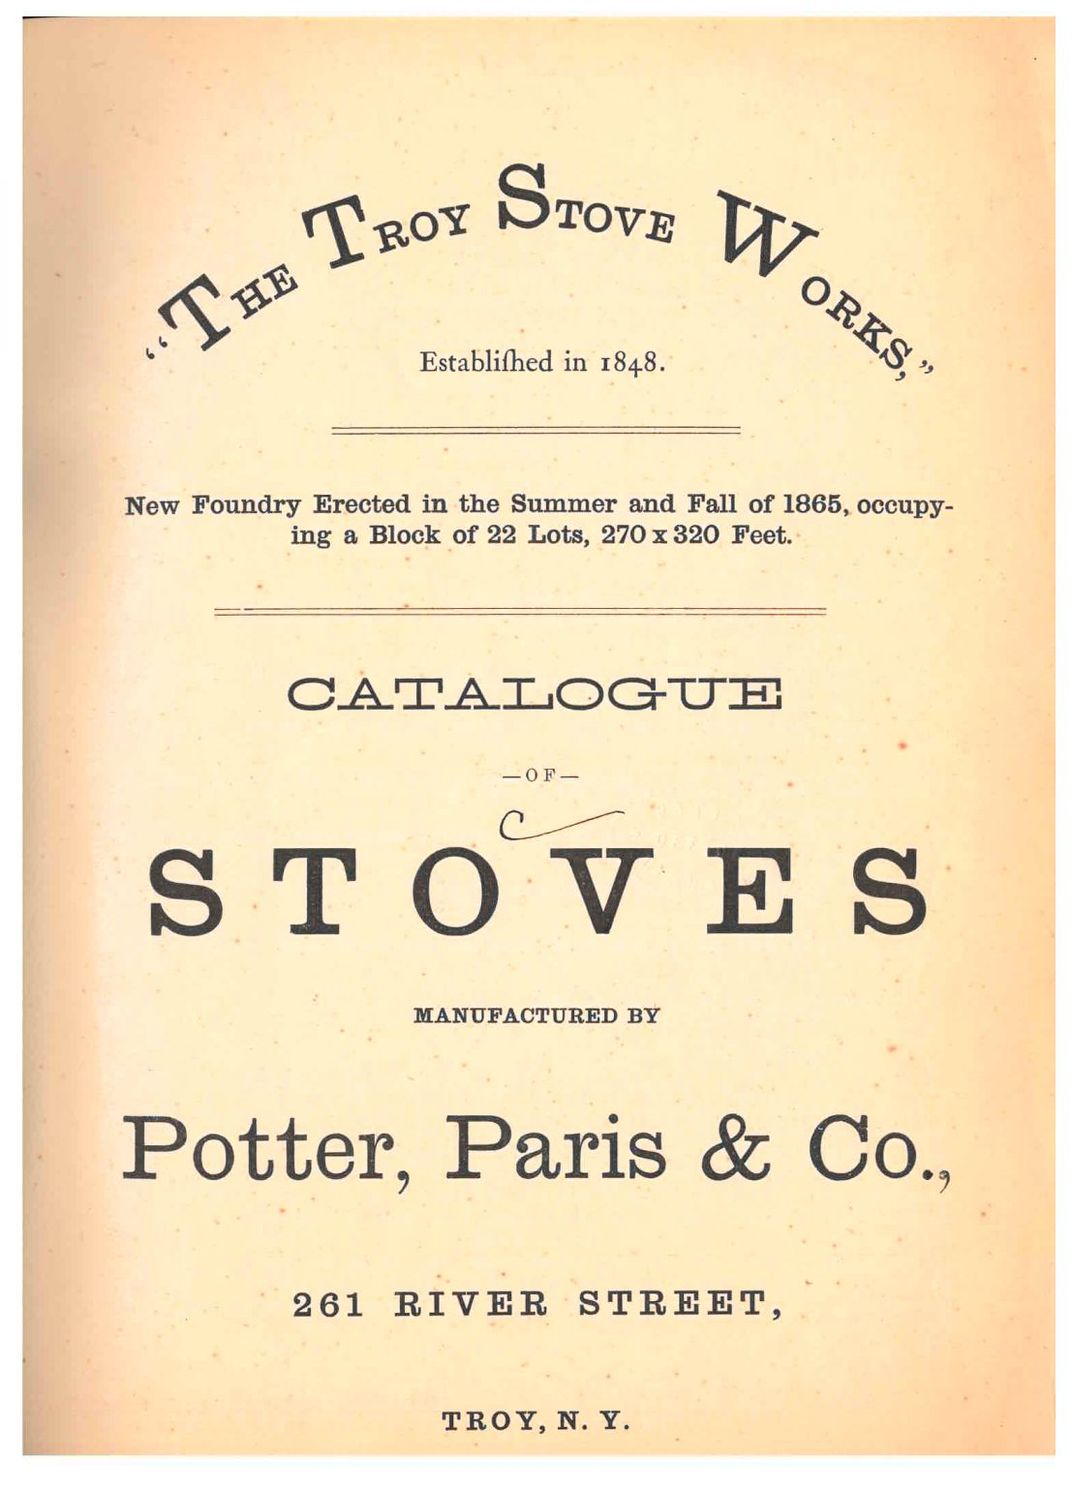 Title page of trade catalog.